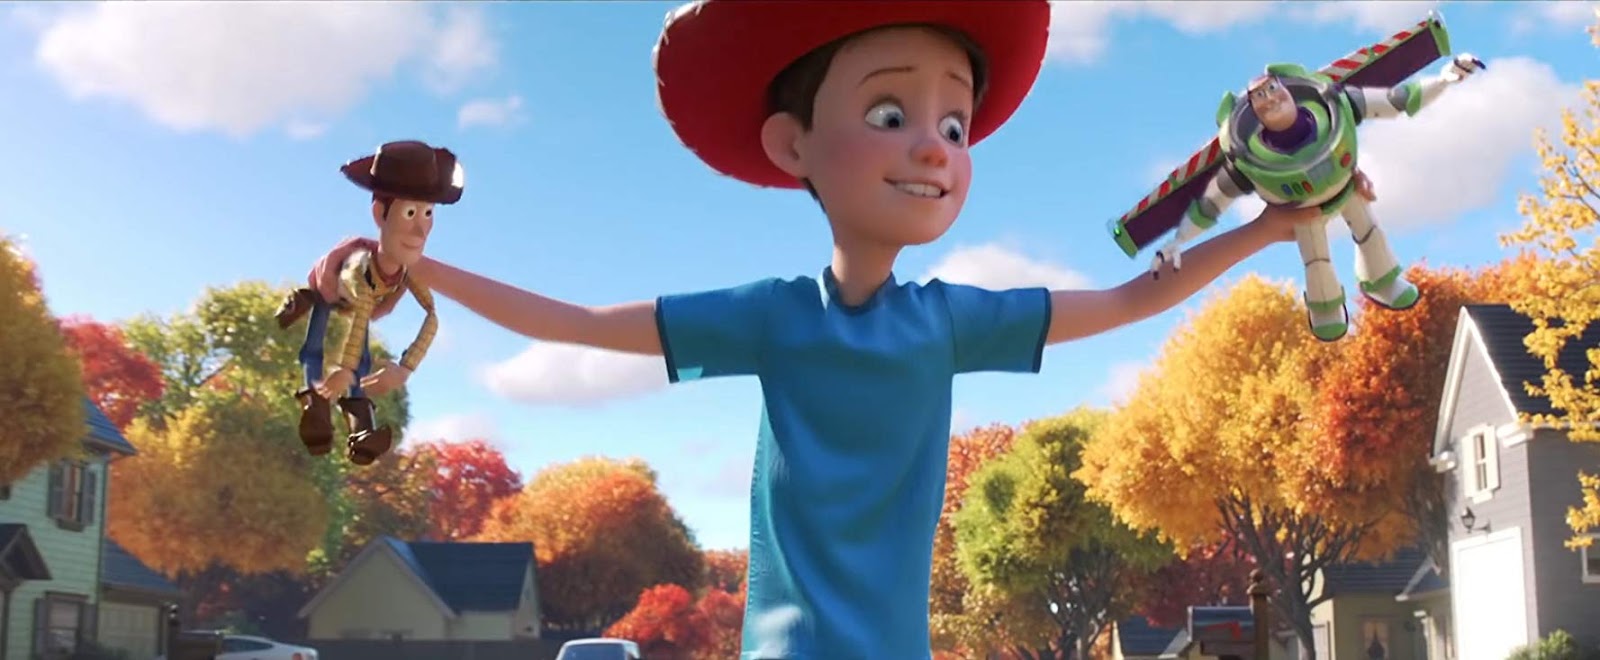 √ Download Toy Story 4 (2019) Sub Indo Full Movie